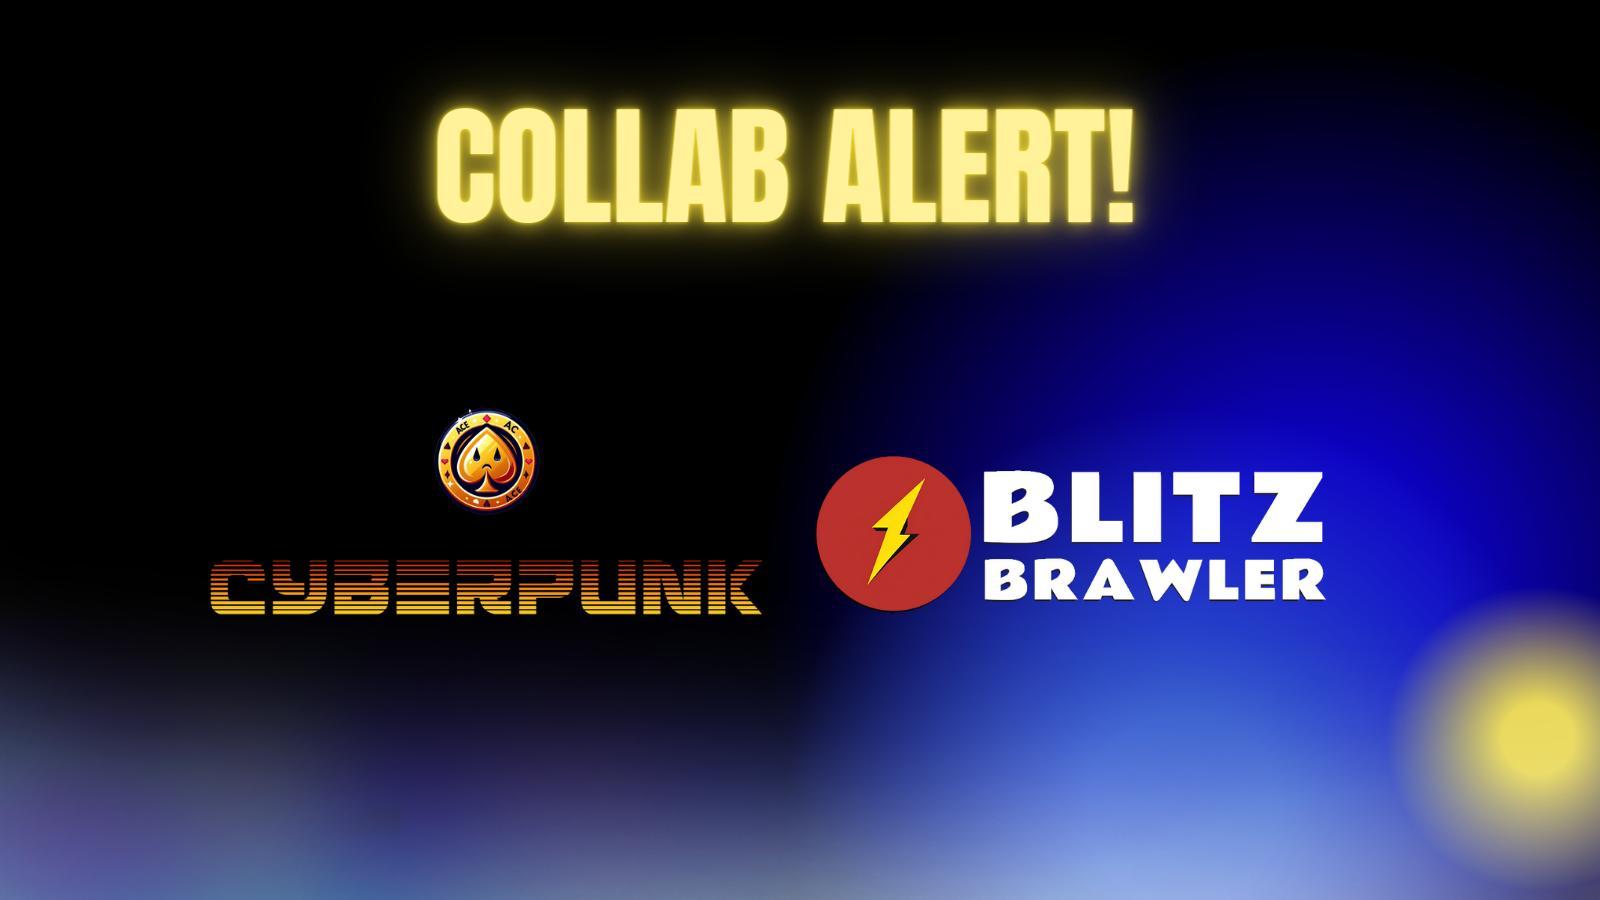 🎉🚀 Cyberpunk and BlitzBrawler Unite Forces! Enter the Crypto Blitz for Exclusive KEY NFTs! 🎮💰